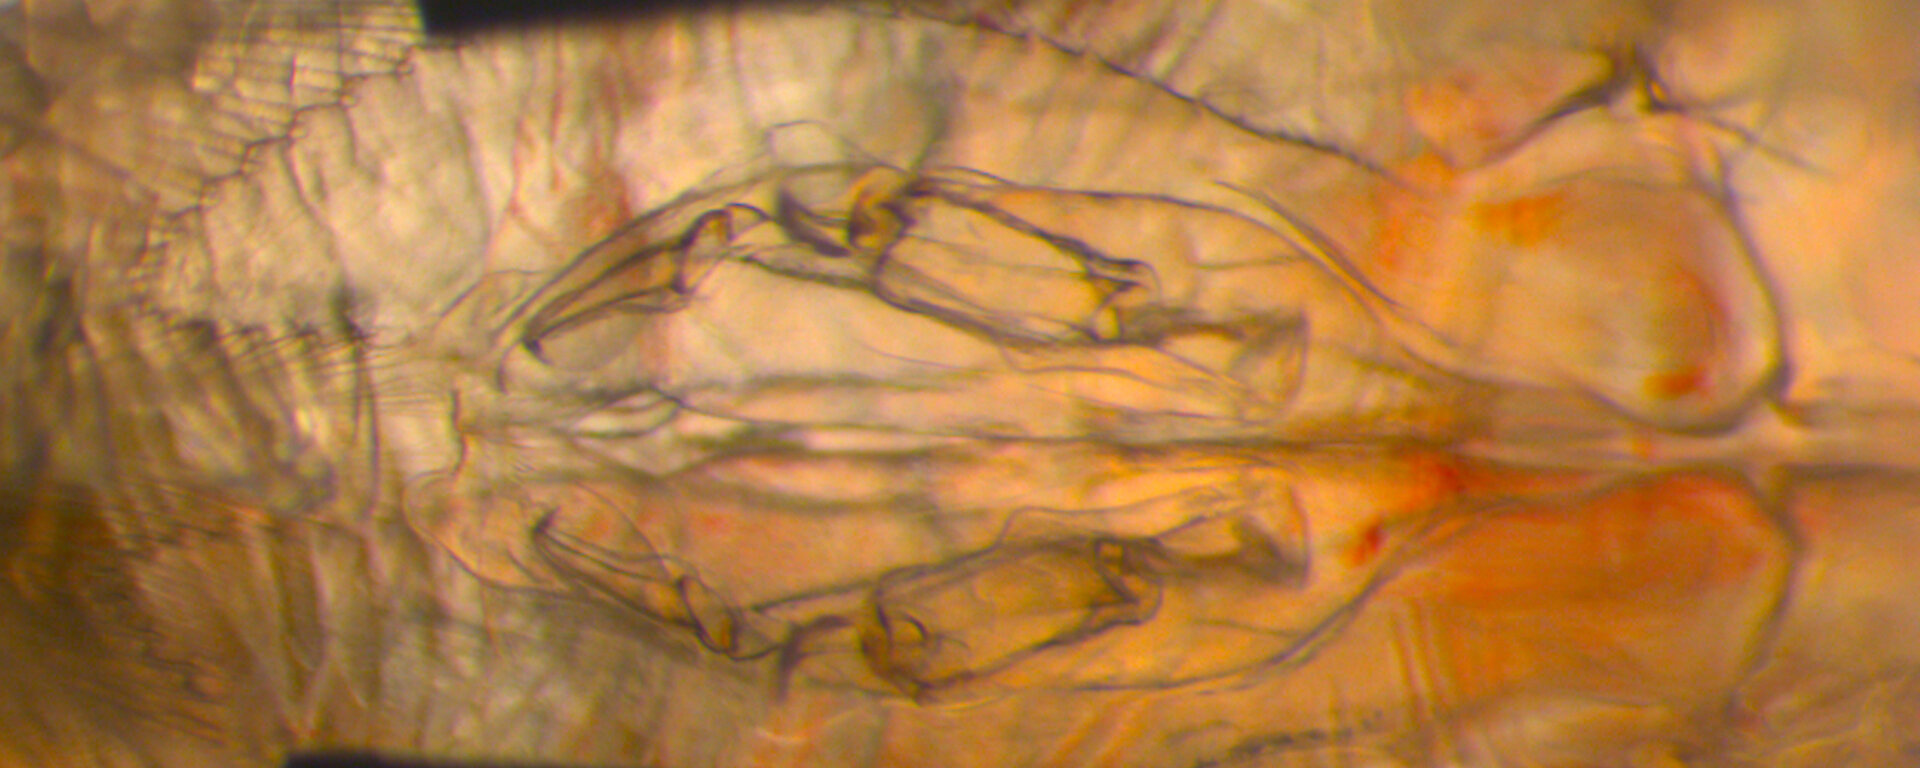 A male krill sexual structure under the microscope.